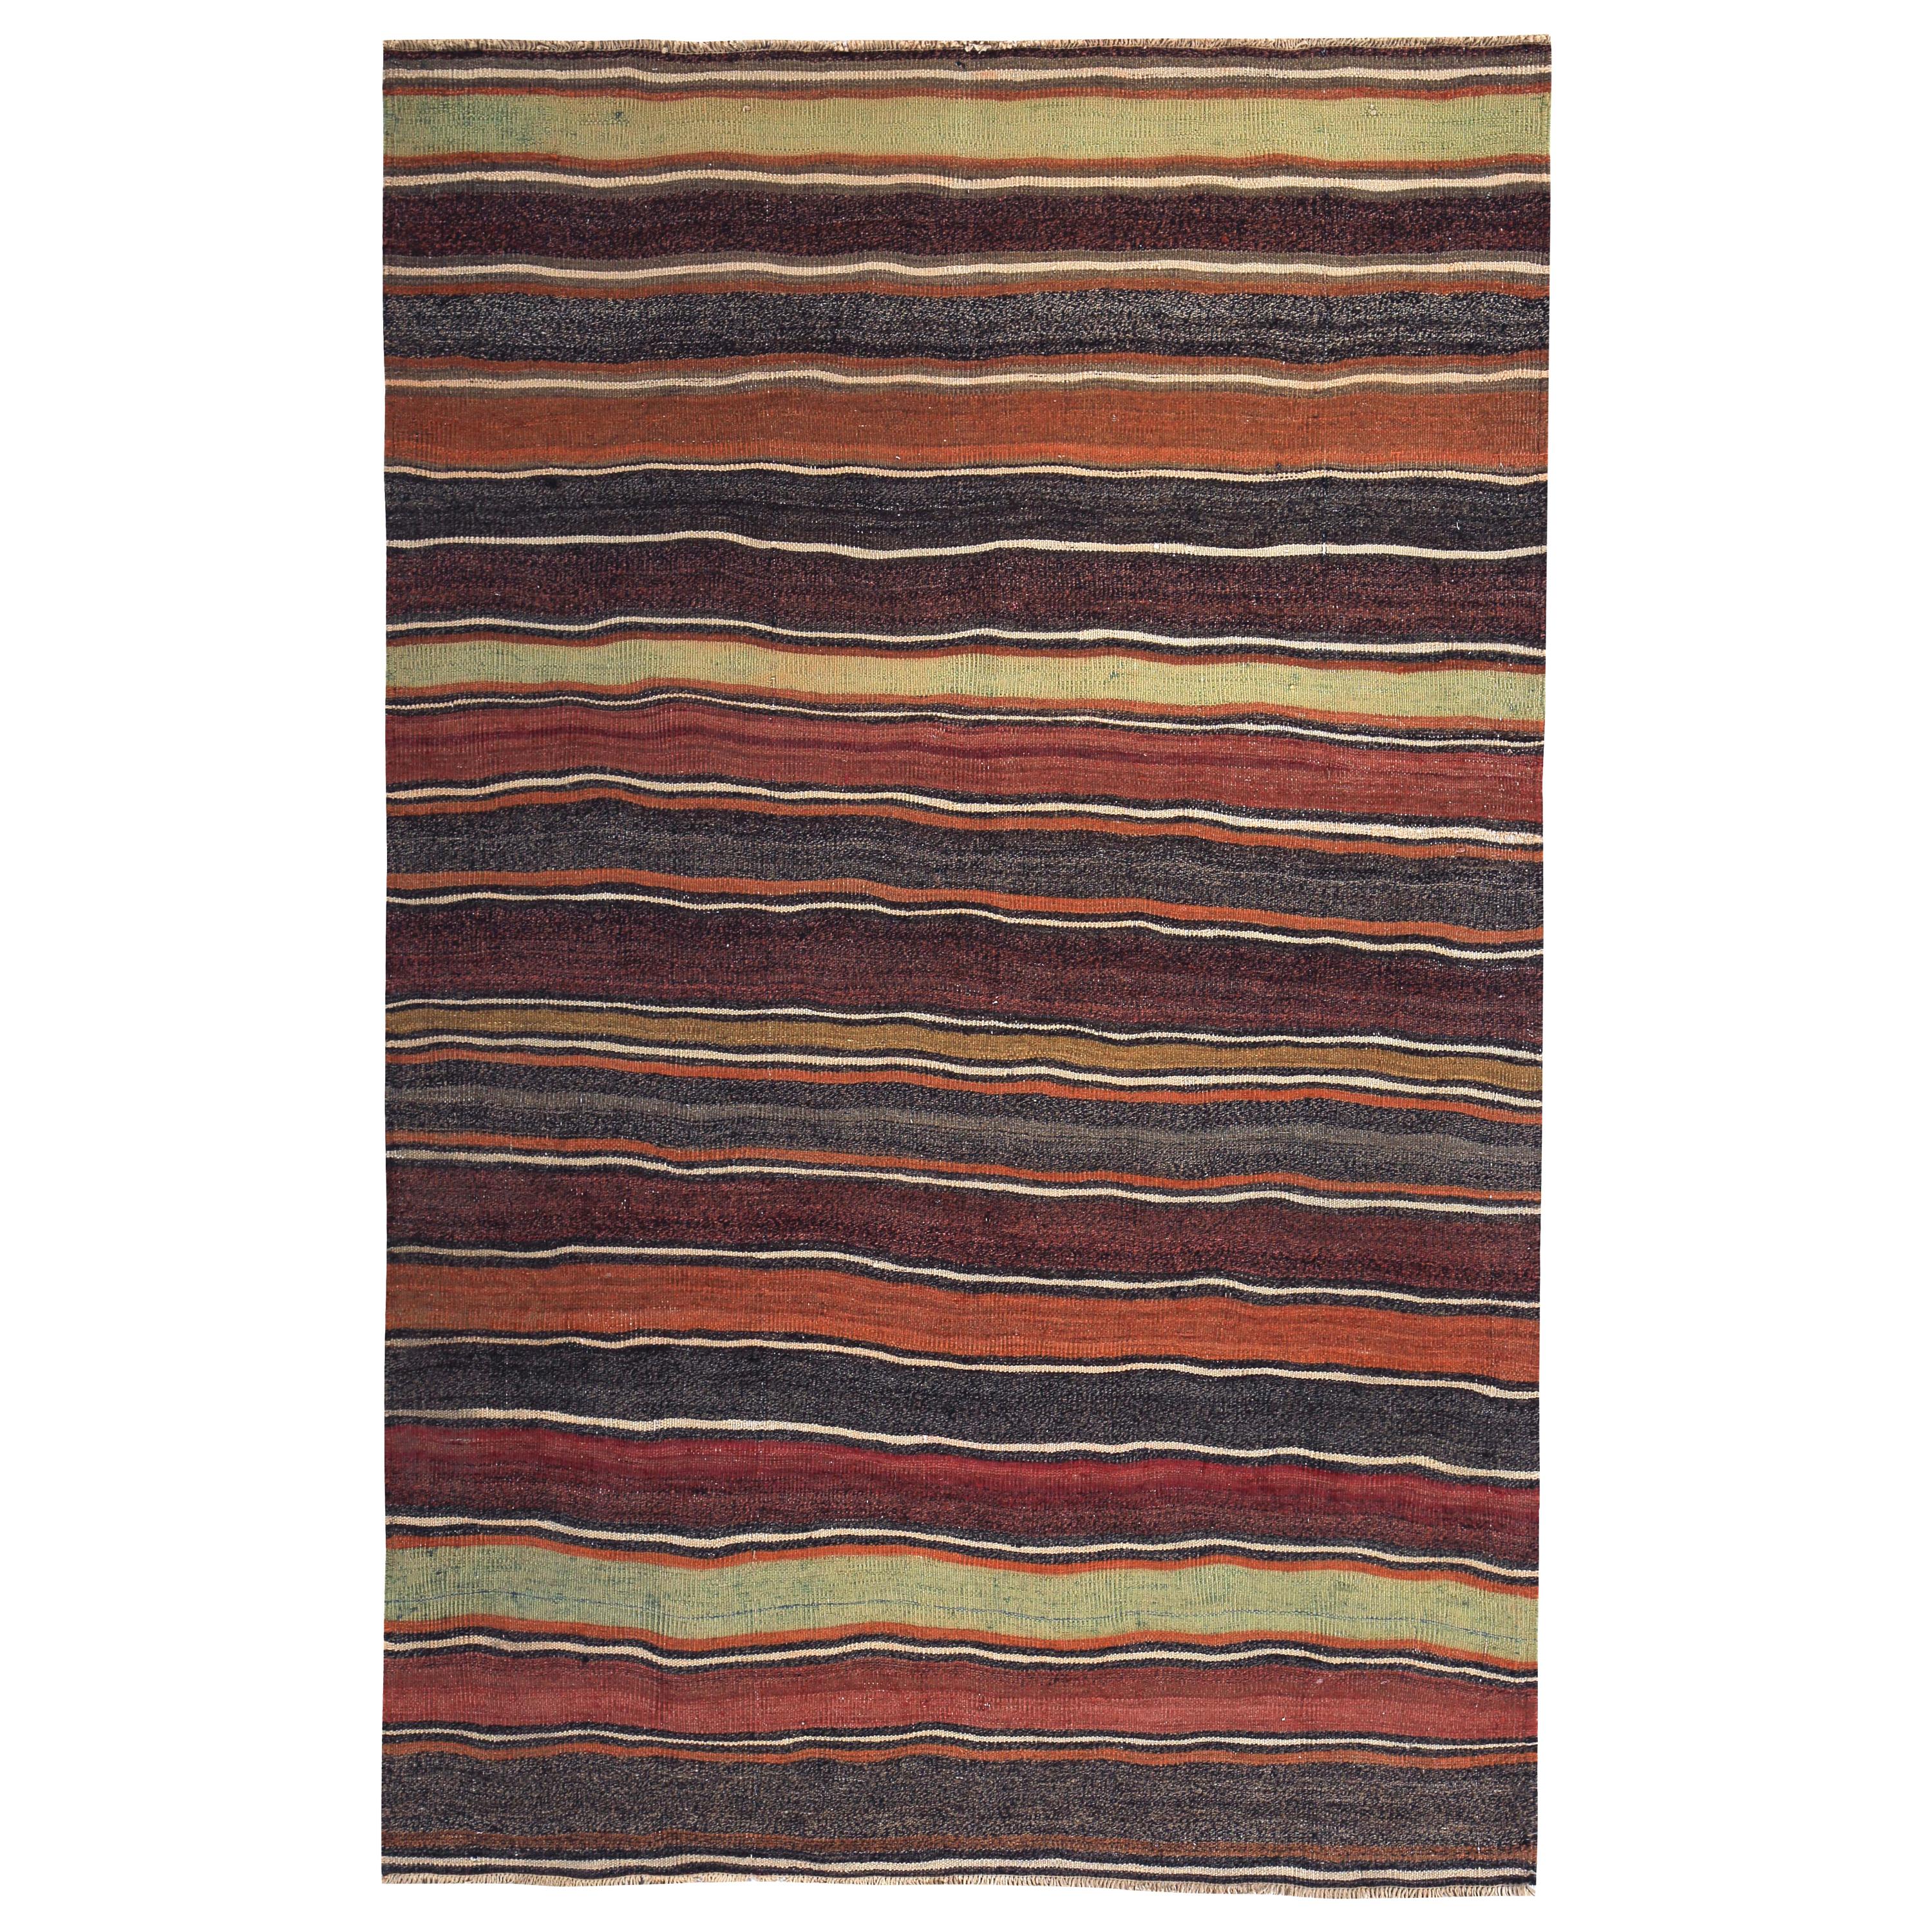 Modern Turkish Kilim Rug with Red, Yellow and Orange Stripes on a Brown Field For Sale